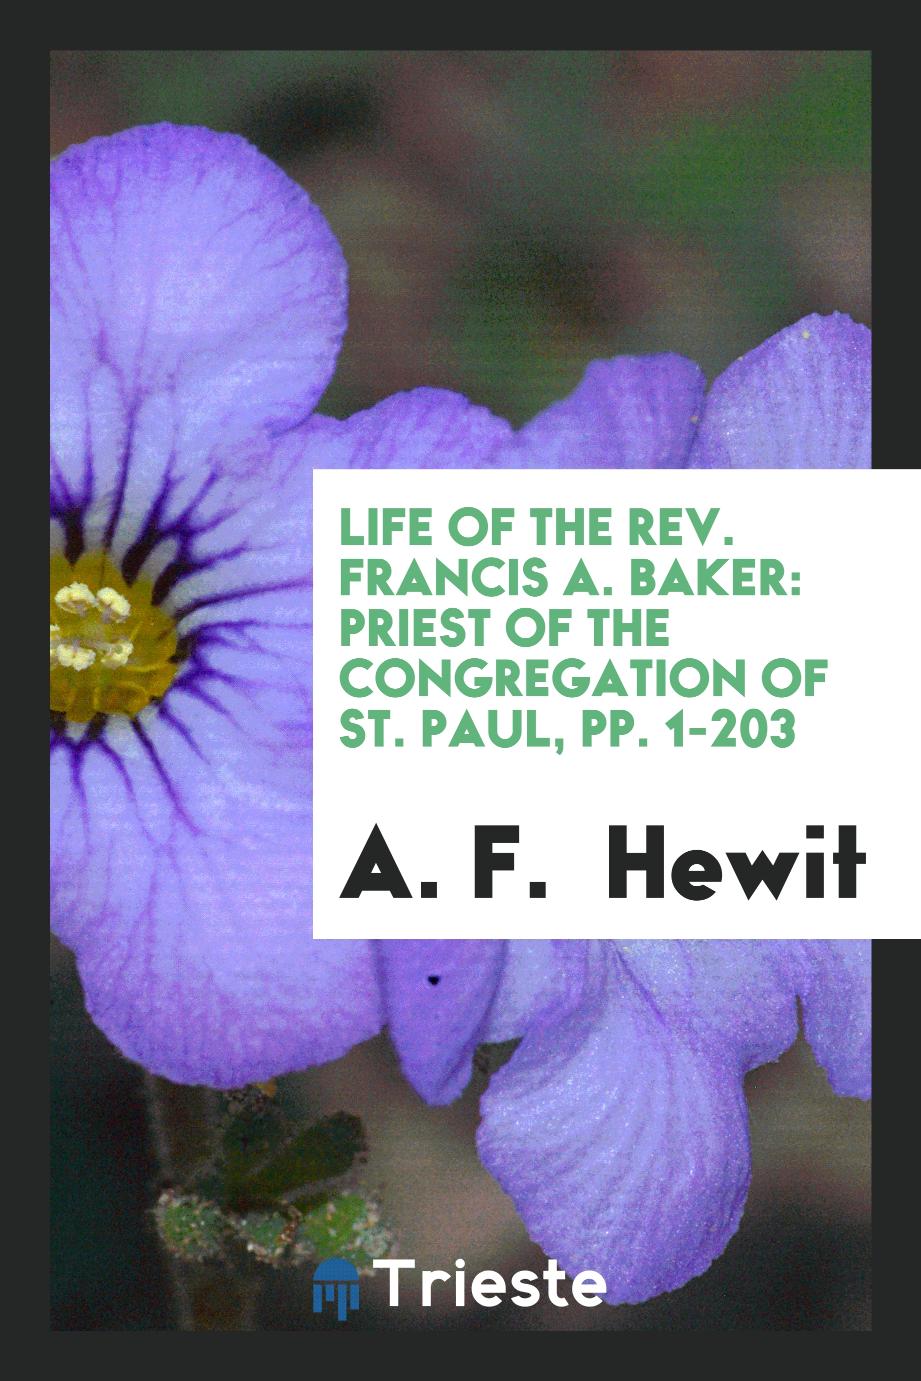 Life of the Rev. Francis A. Baker: Priest of the Congregation of St. Paul, pp. 1-203